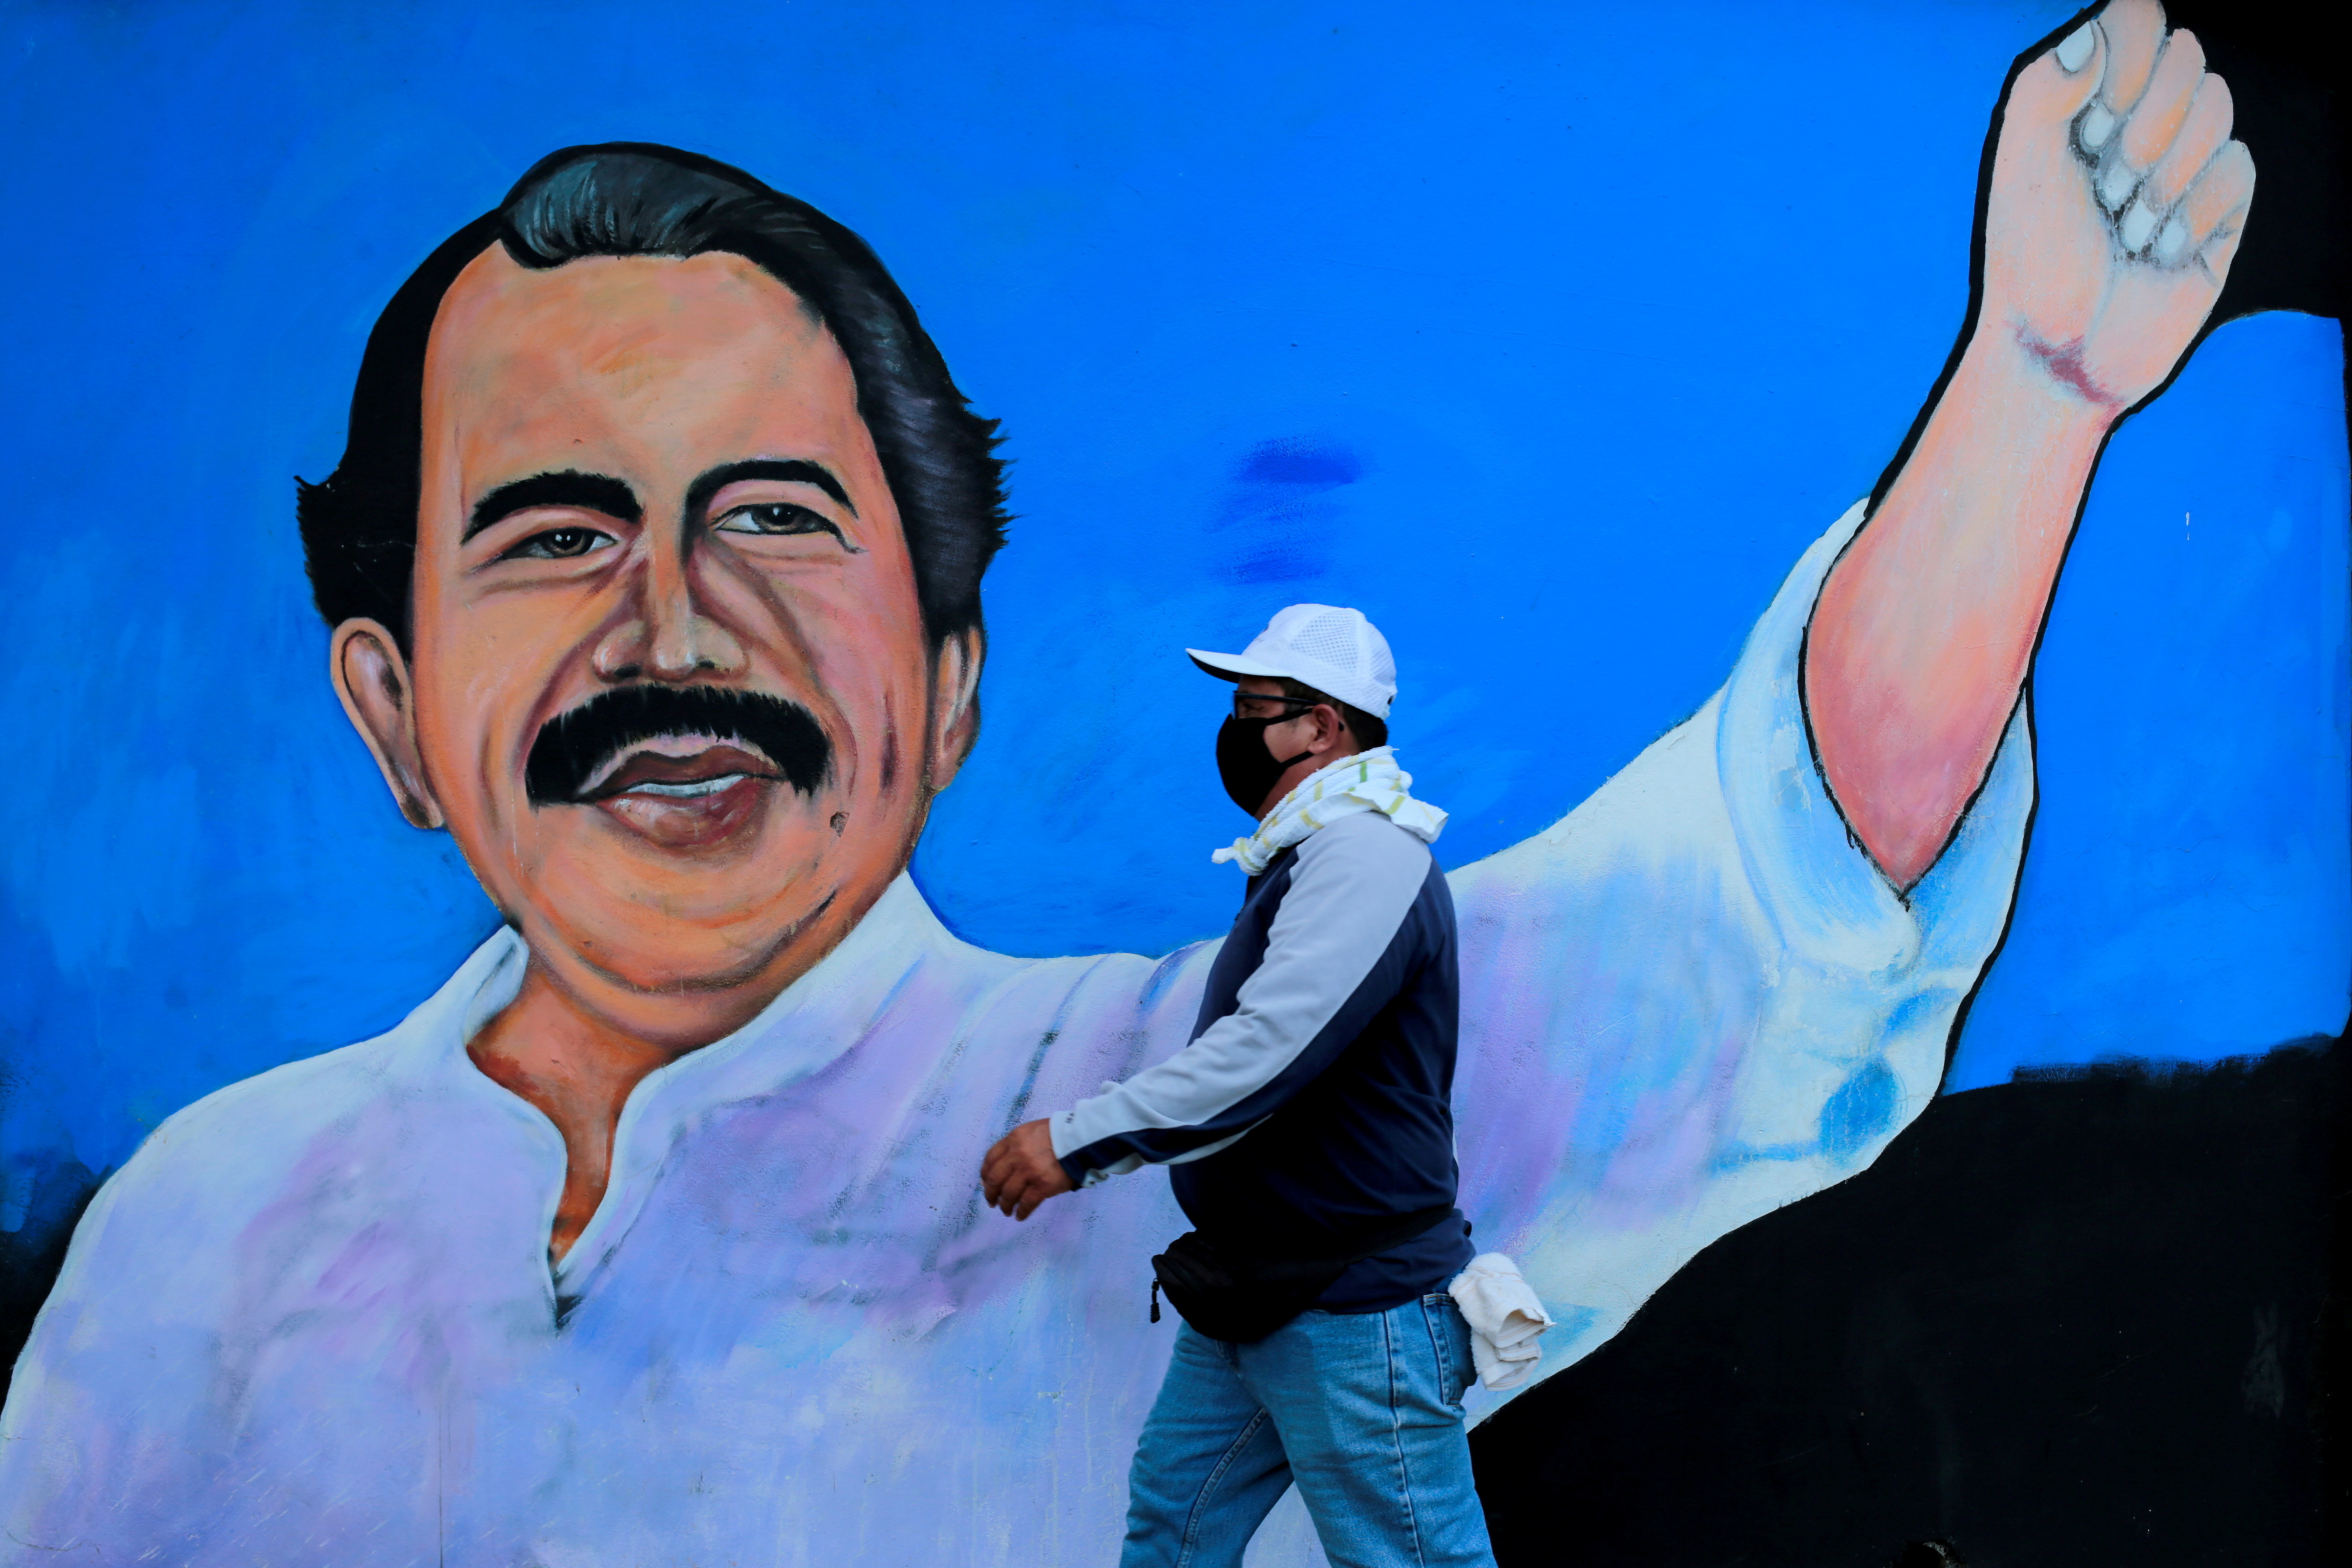 mFILE PHOTO: FILE PHOTO: FILE PHOTO: A man, wearing a face mask for protection against the coronavirus disease (COVID-19), walks by a mural depicting Nicaraguan President Daniel Ortega, in Managua, Nicaragua March 30, 2020.